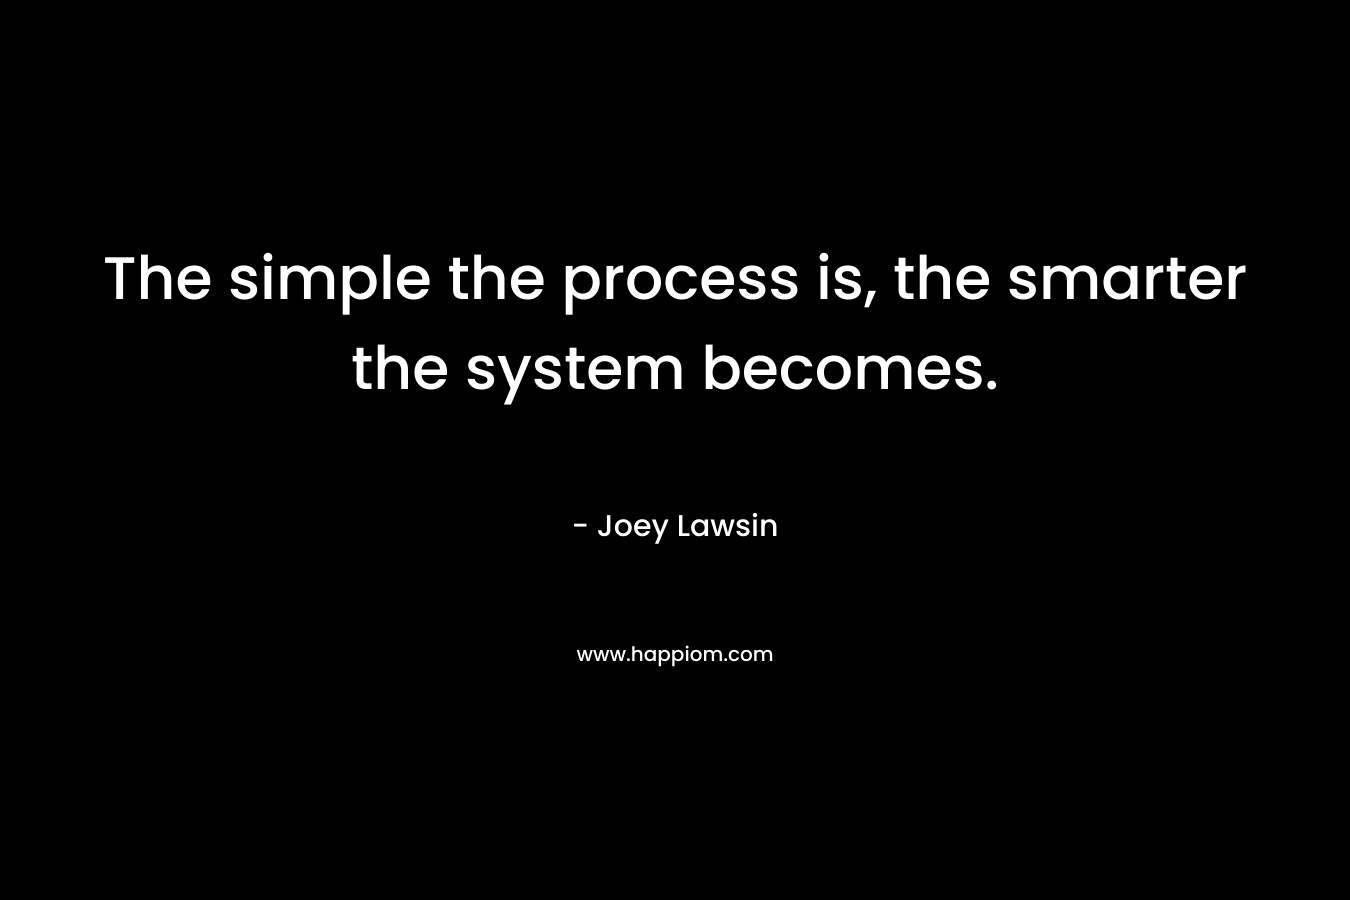 The simple the process is, the smarter the system becomes.